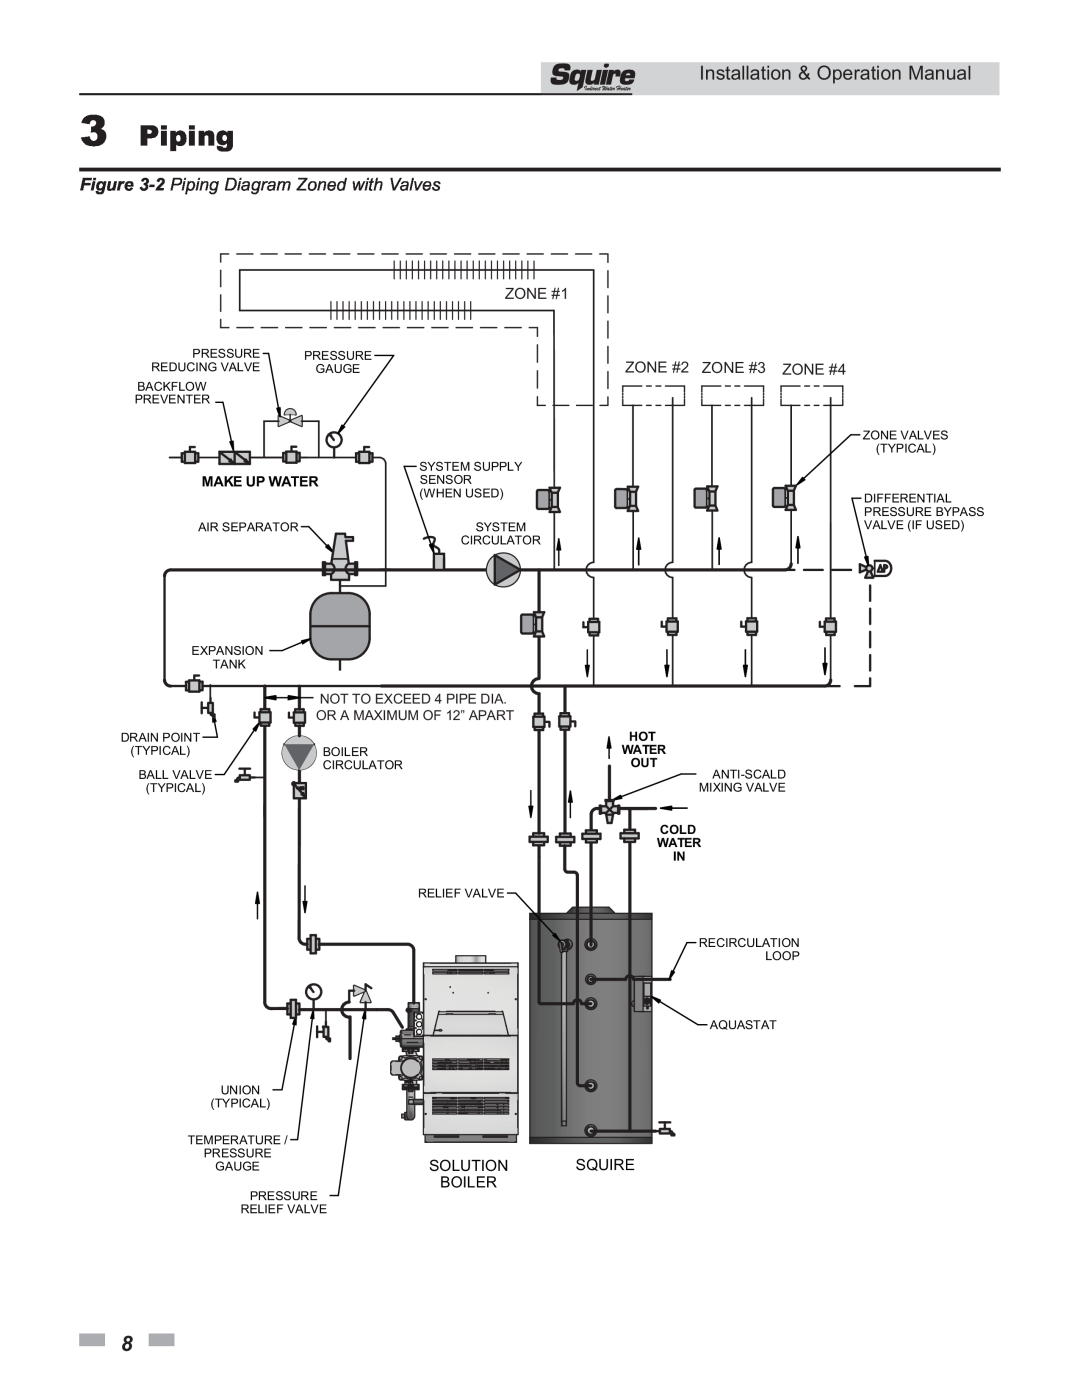 Lochinvar SSS031 2 Piping Diagram Zoned with Valves, 3Piping, ZONE #2 ZONE #3 ZONE #4, ZONE #1, Make Up Water, Solution 